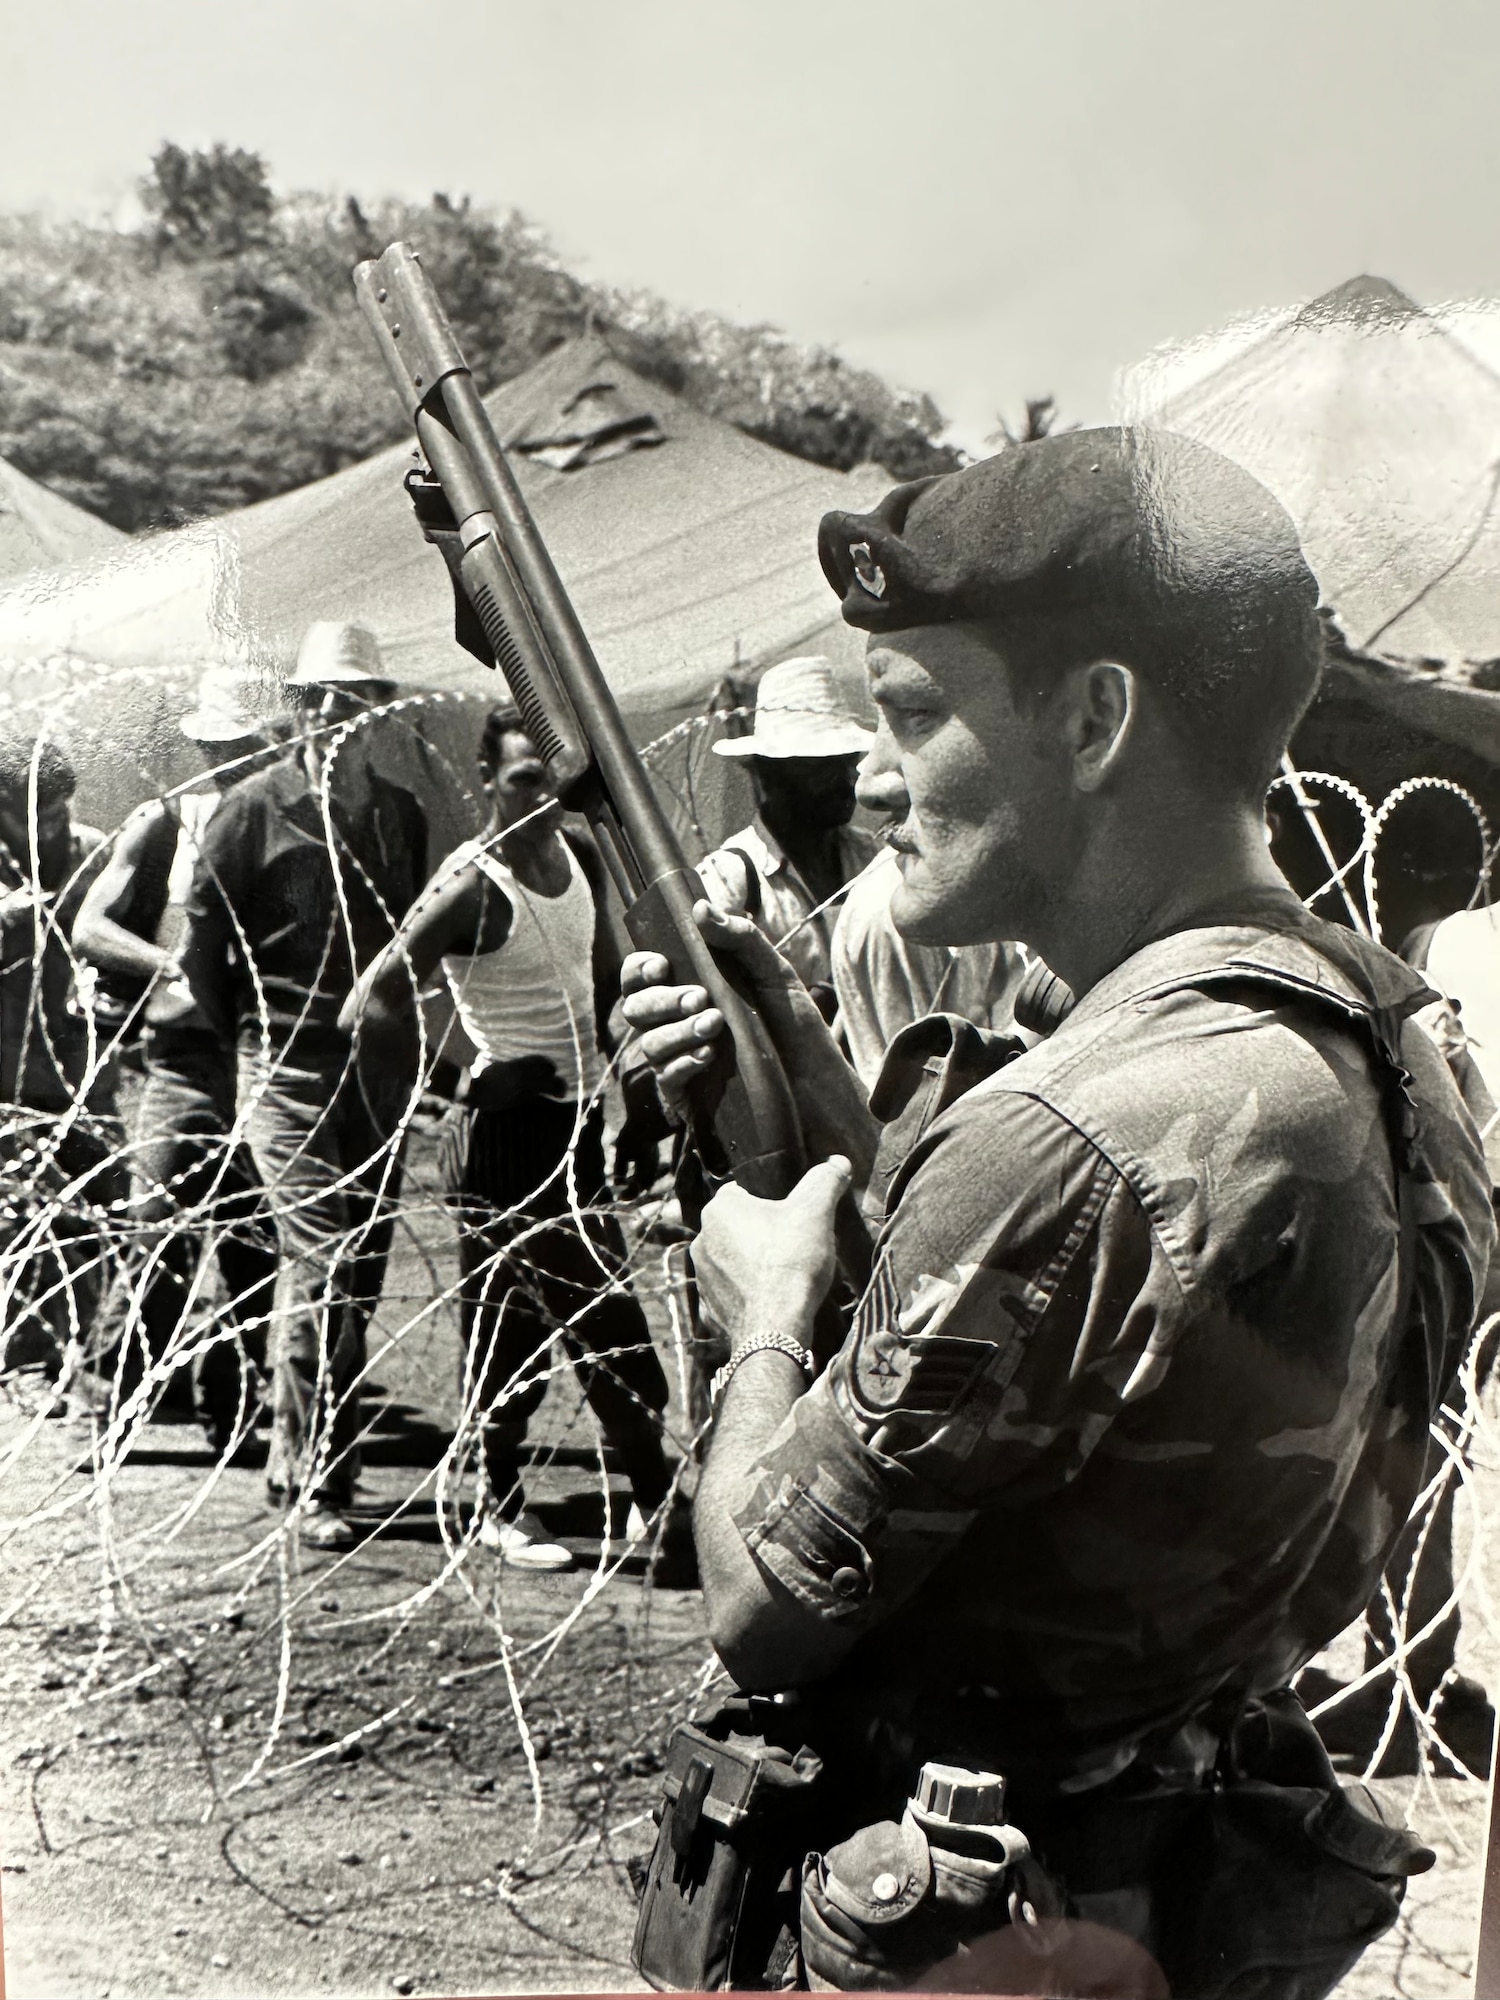 A Security Policeman stands guard over Grenadian and Cuban prisoners during Operation URGENT FURY in late 1983.  The major command insignia worn on the beret pre-1997 is a prior version of the current beret which is when the “Defensor Fortis” cloth flash was adopted.  The Military Airlift Command insignia on this SP denotes that he was deployed from a MAC base. (375th Air Mobility Wing Historical Archives)